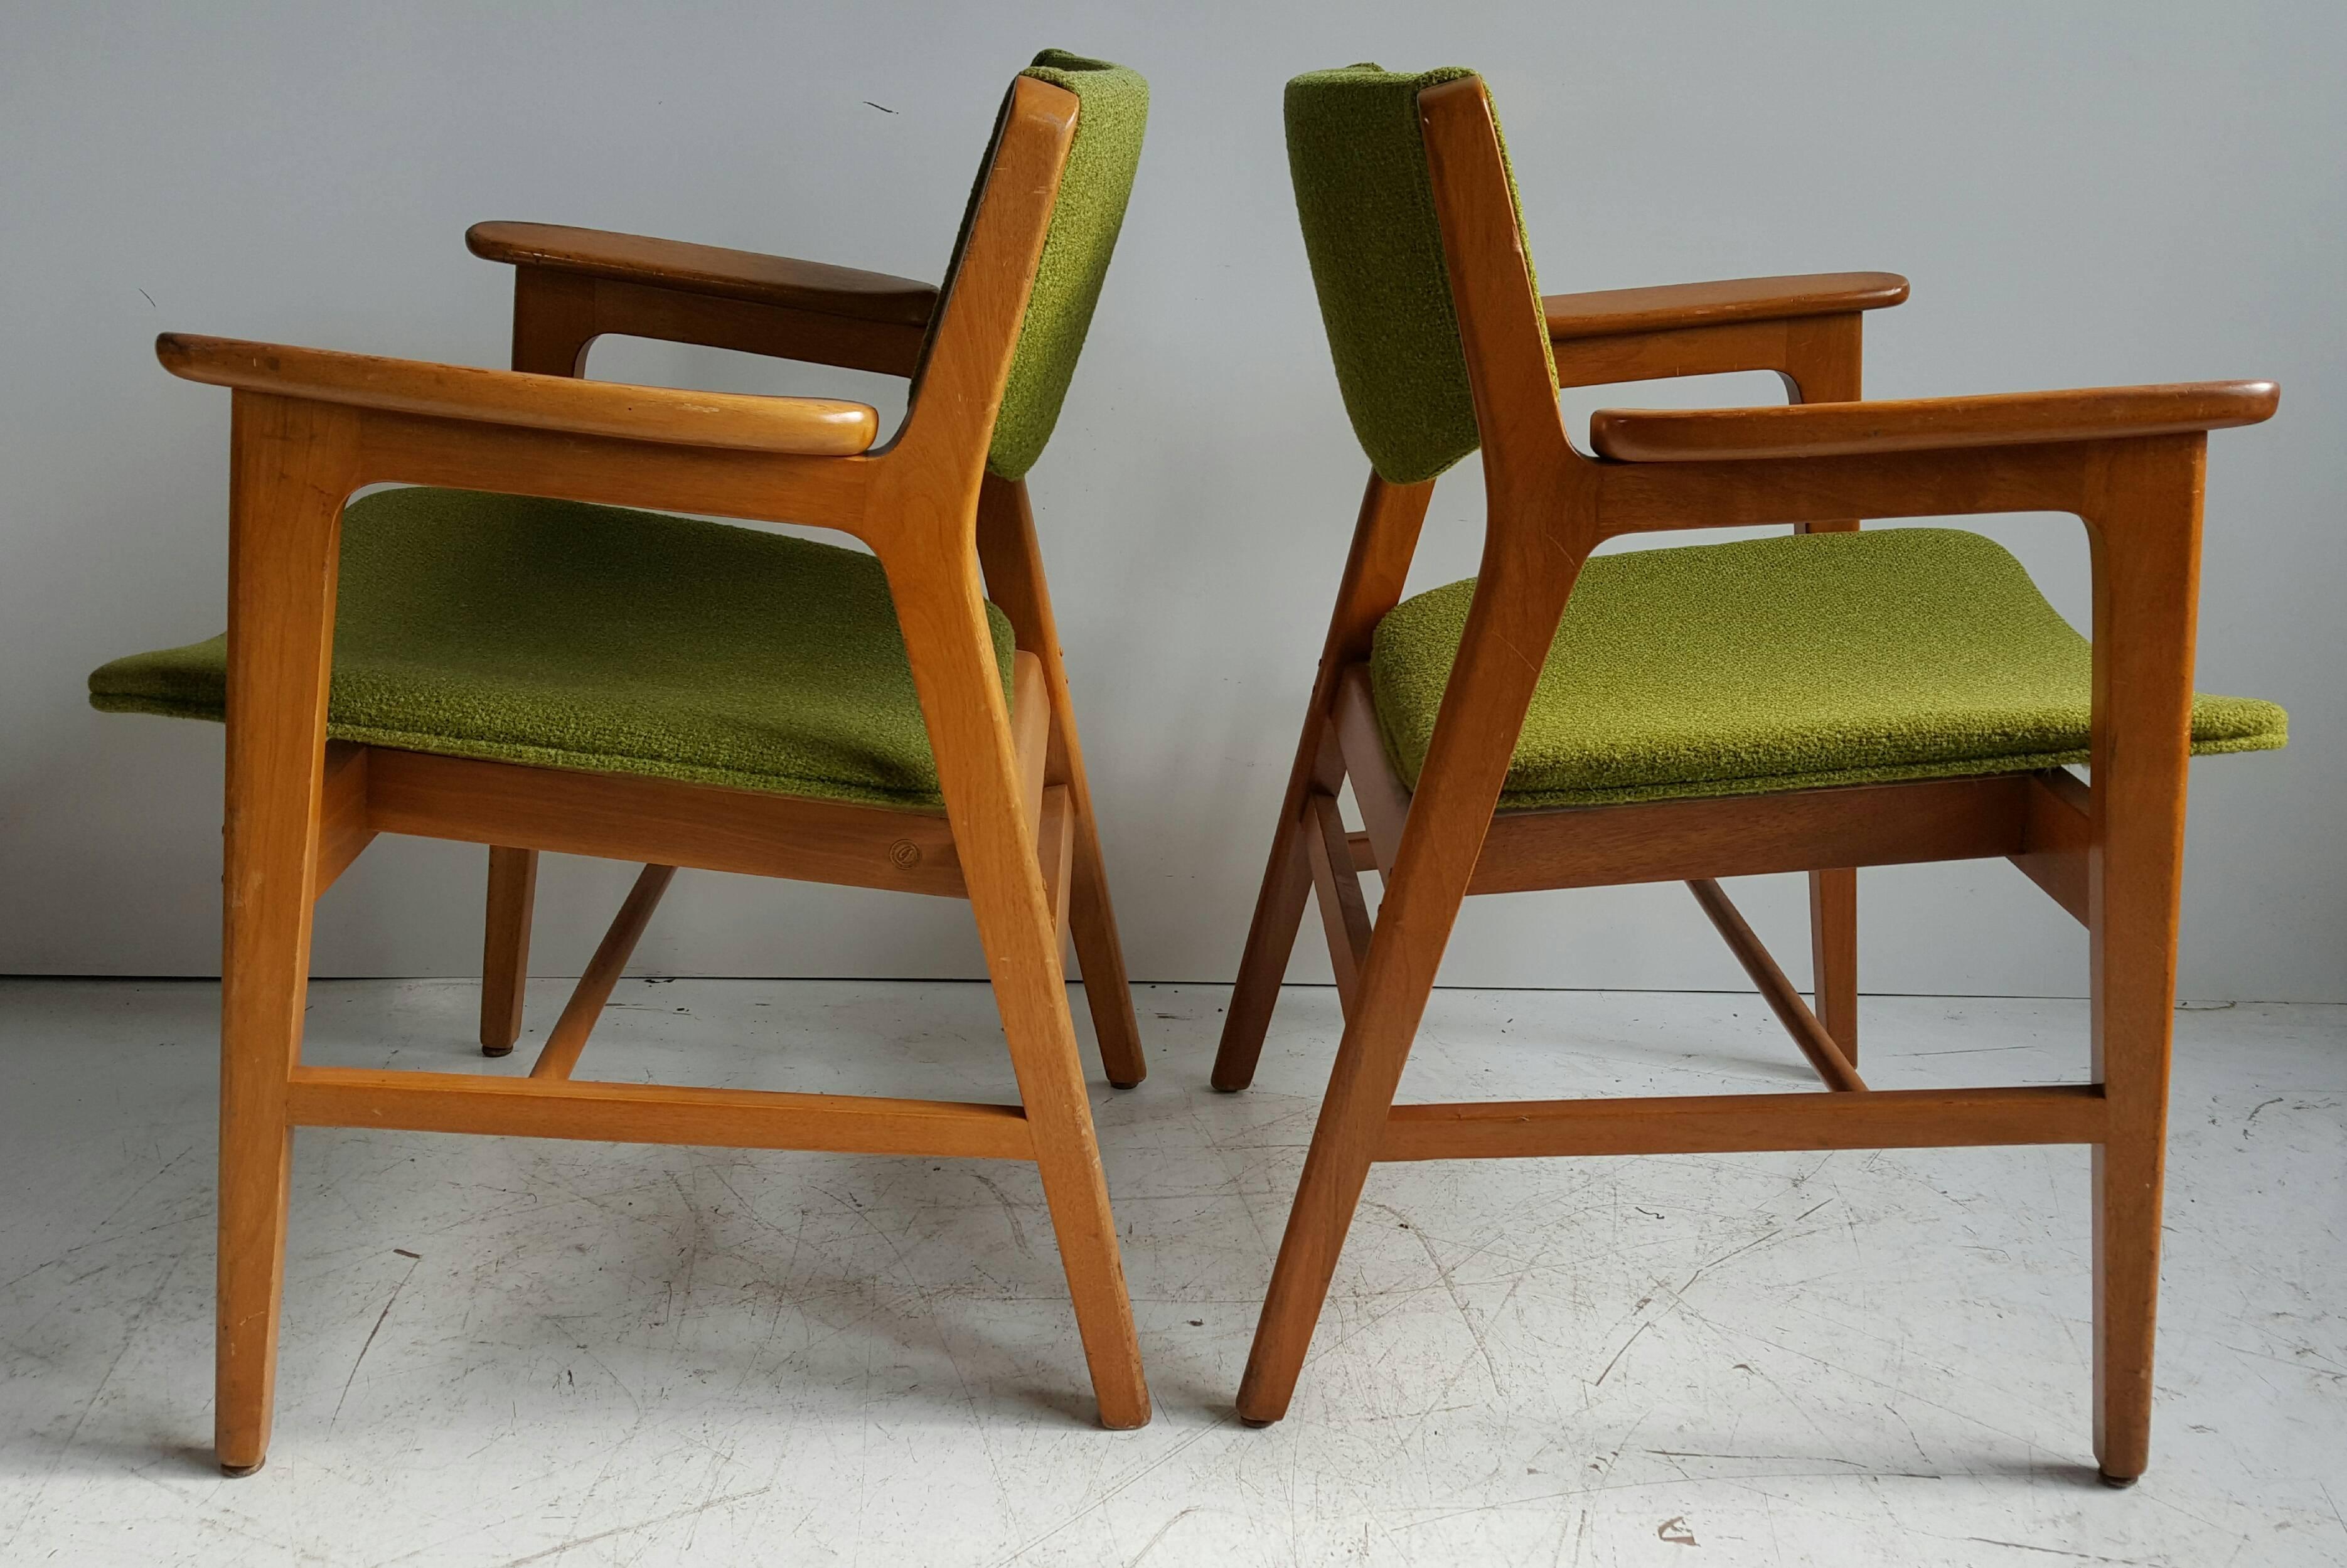 American Classic Mid-Century Modern Armchairs, Manufactured by W.H. Gunlocke Chair Co.